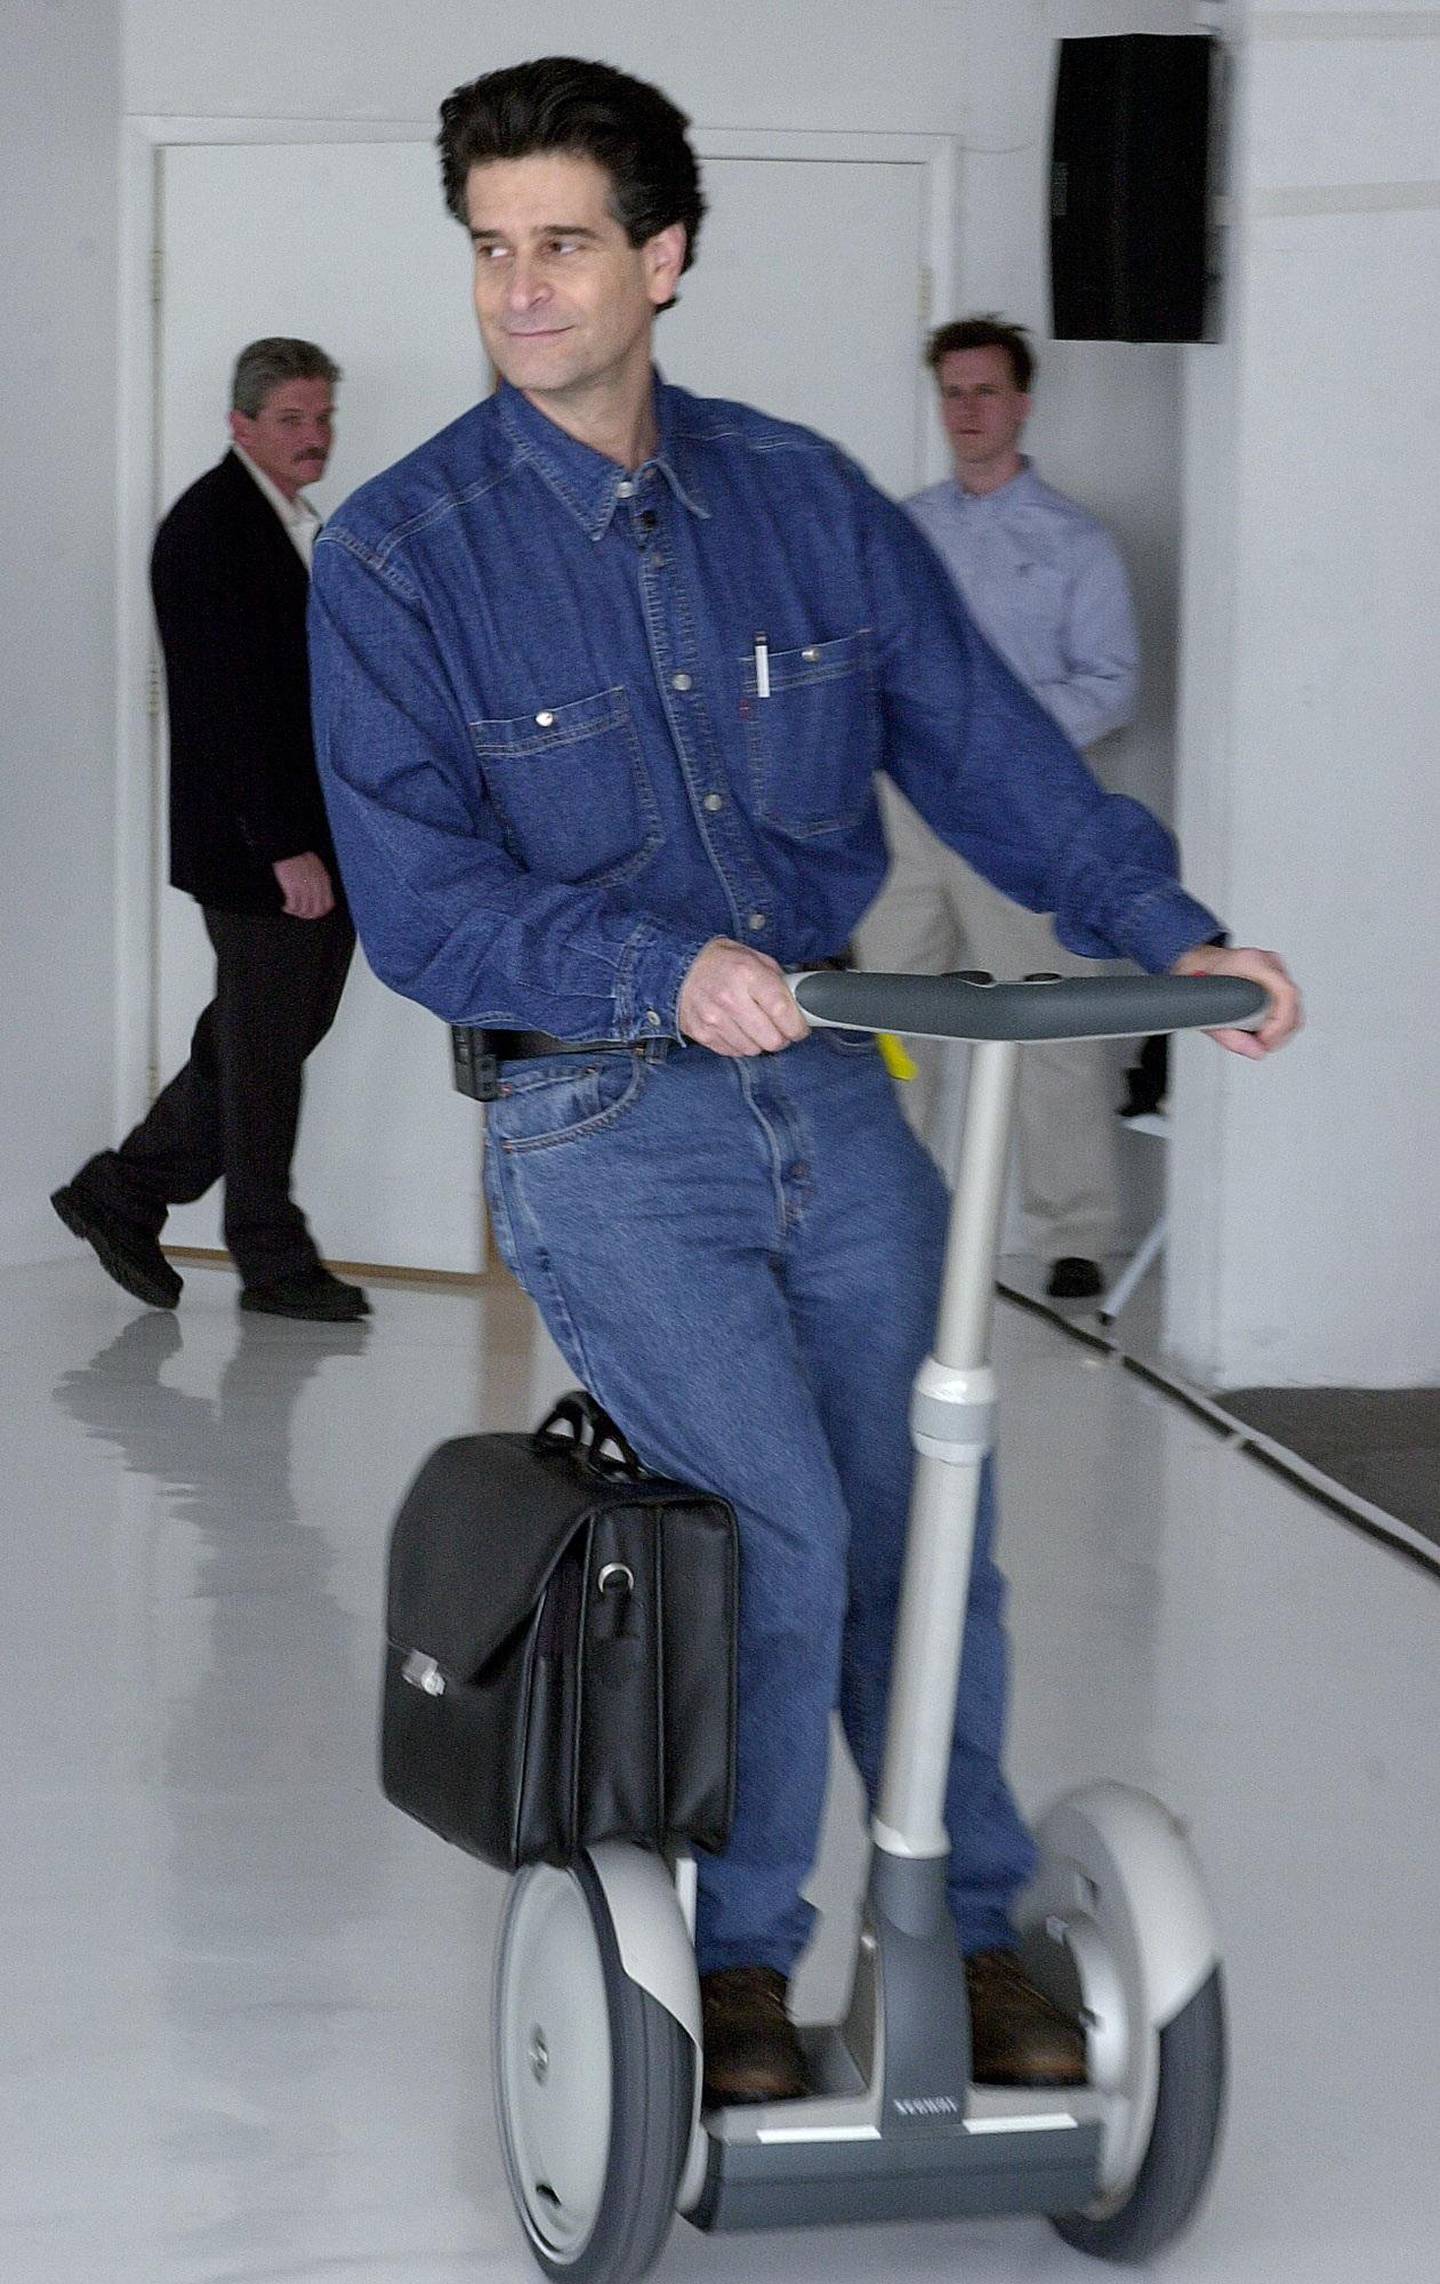 **FILE**  Inventor Dean Kamen leans to initiate a turn as he demonstrates his Segway Human Transporter, a one-person, battery-powered scooter, unveiled in this Monday, Dec. 3, 2001 file photo, in New York. Segway Inc. is recalling all 23,500 of the self-balancing scooters it has shipped to date because of a software glitch that can make its wheels unexpectedly reverse direction, causing riders to fall off.  (AP Photo/Suzanne Plunkett, FILE)